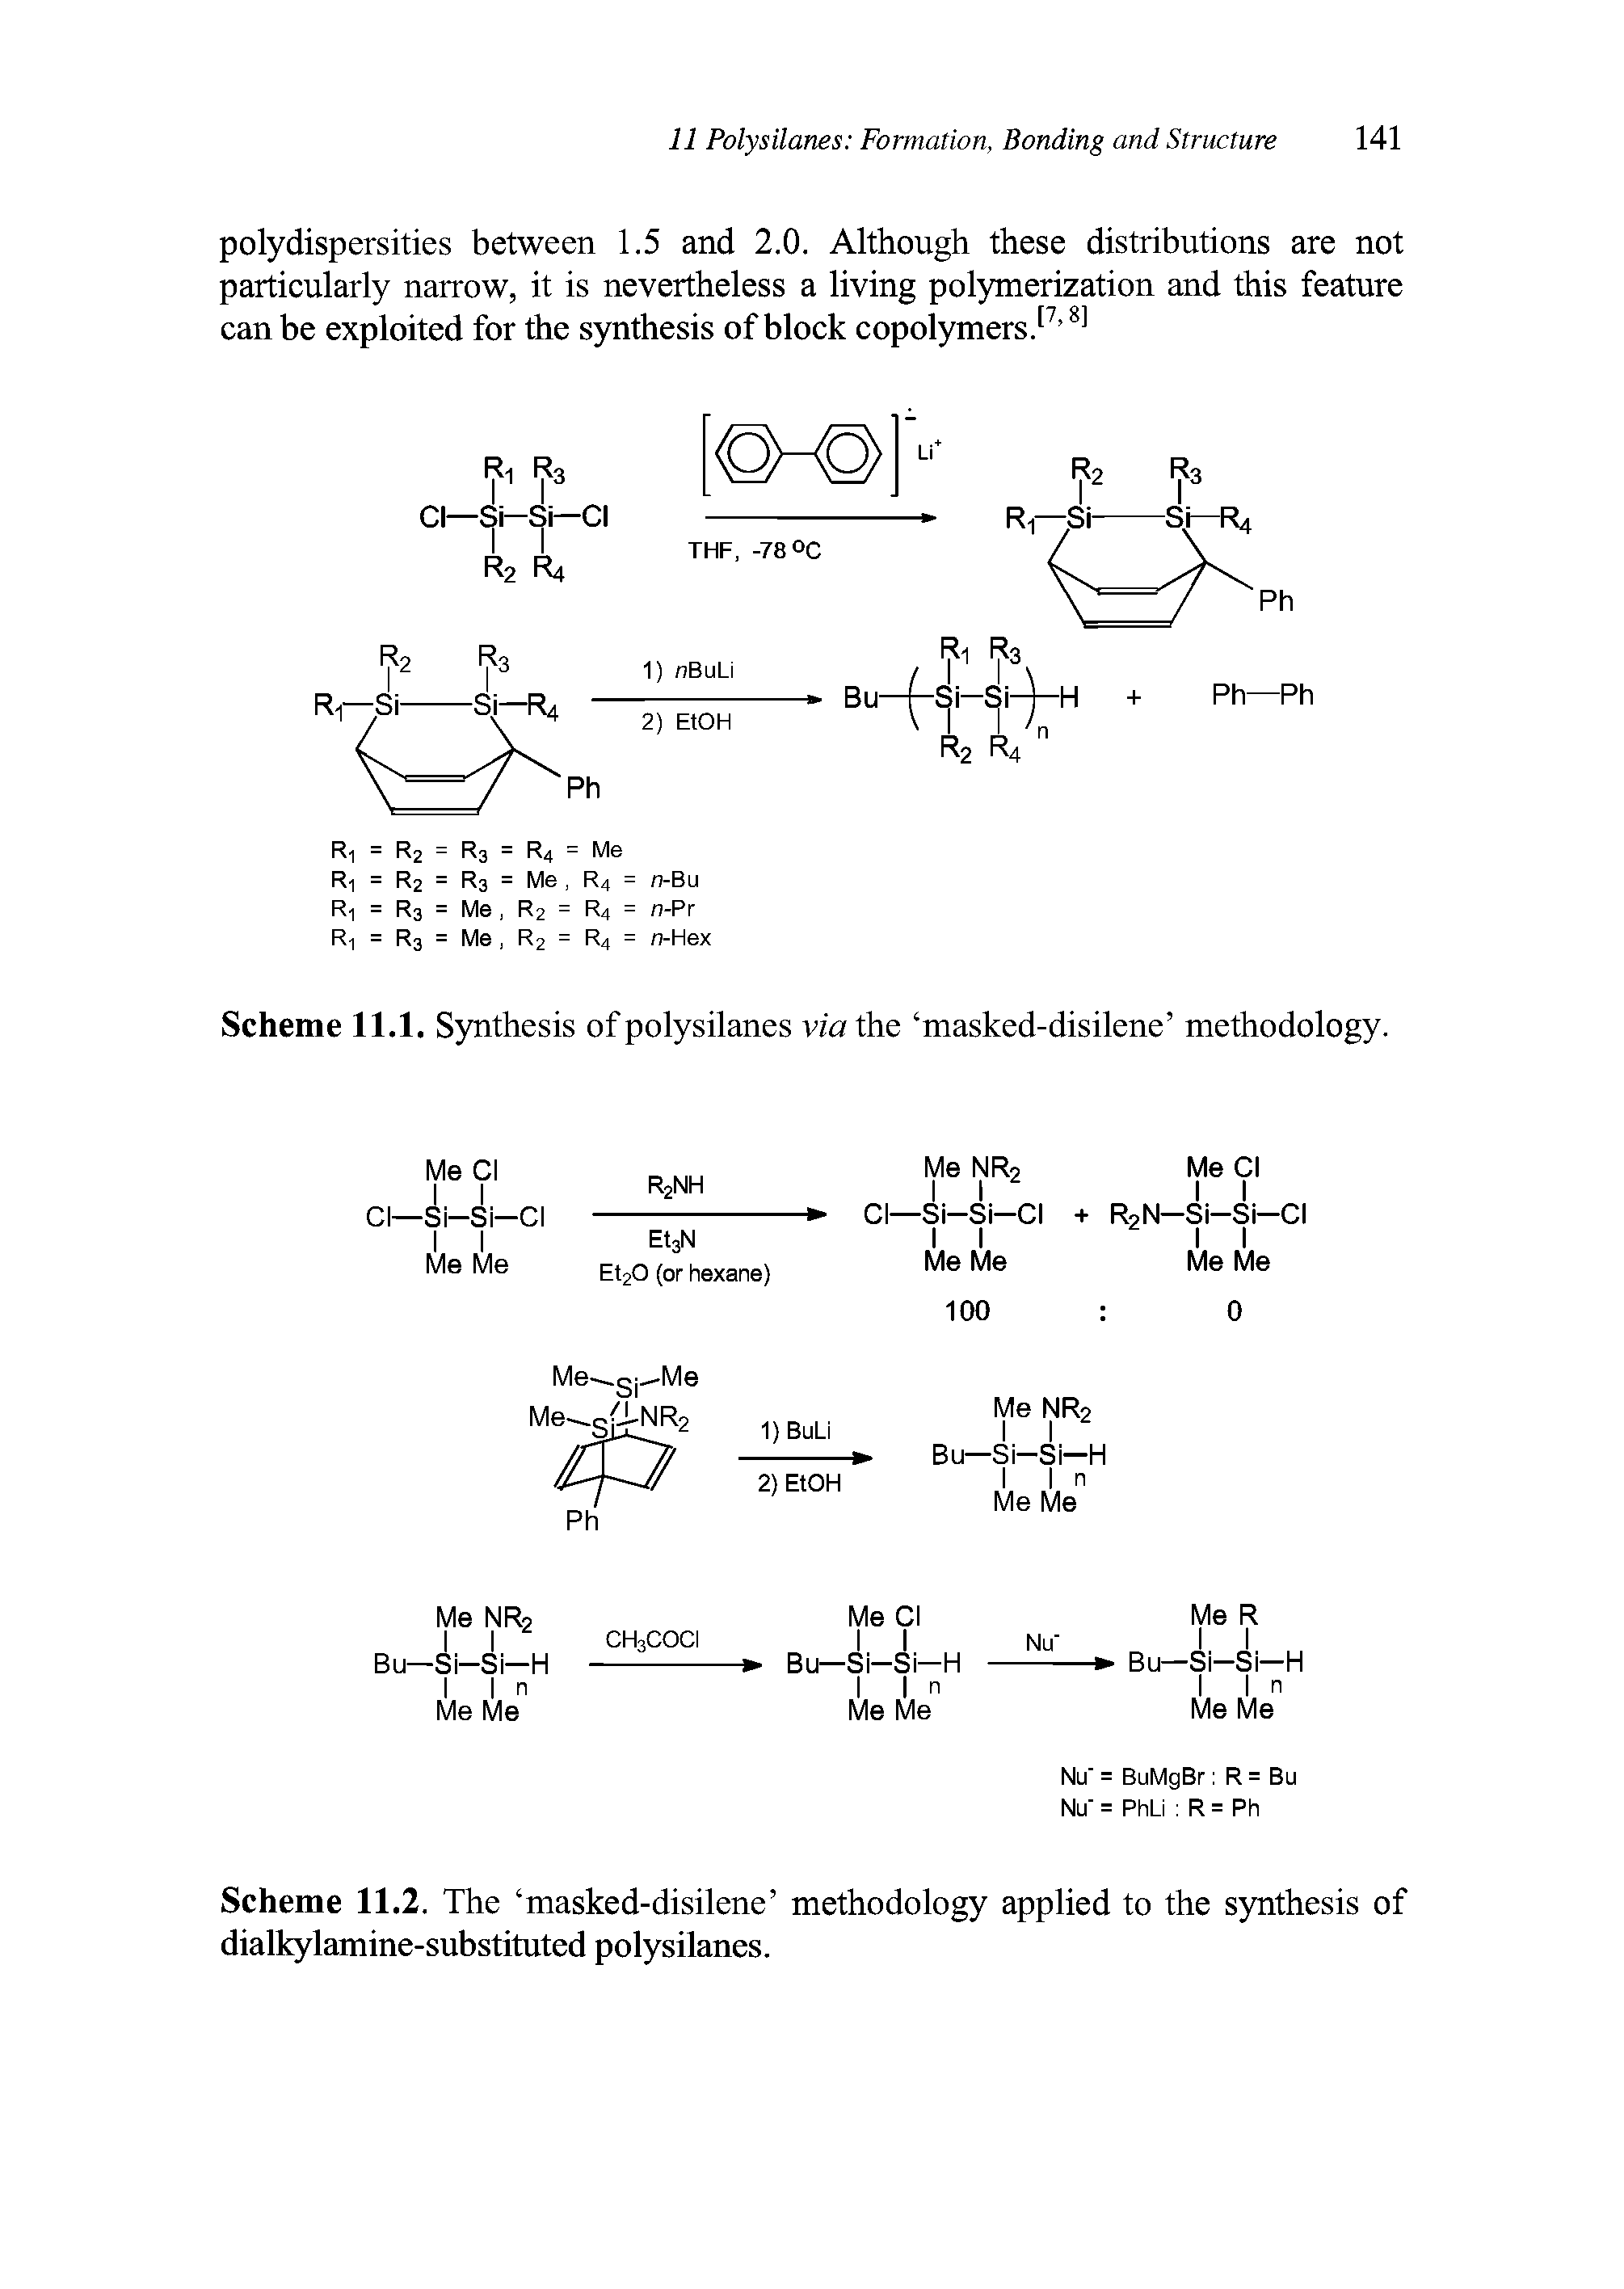 Scheme 11.2. The masked-disilene methodology applied to the synthesis of dialkylamine-substituted polysilanes.